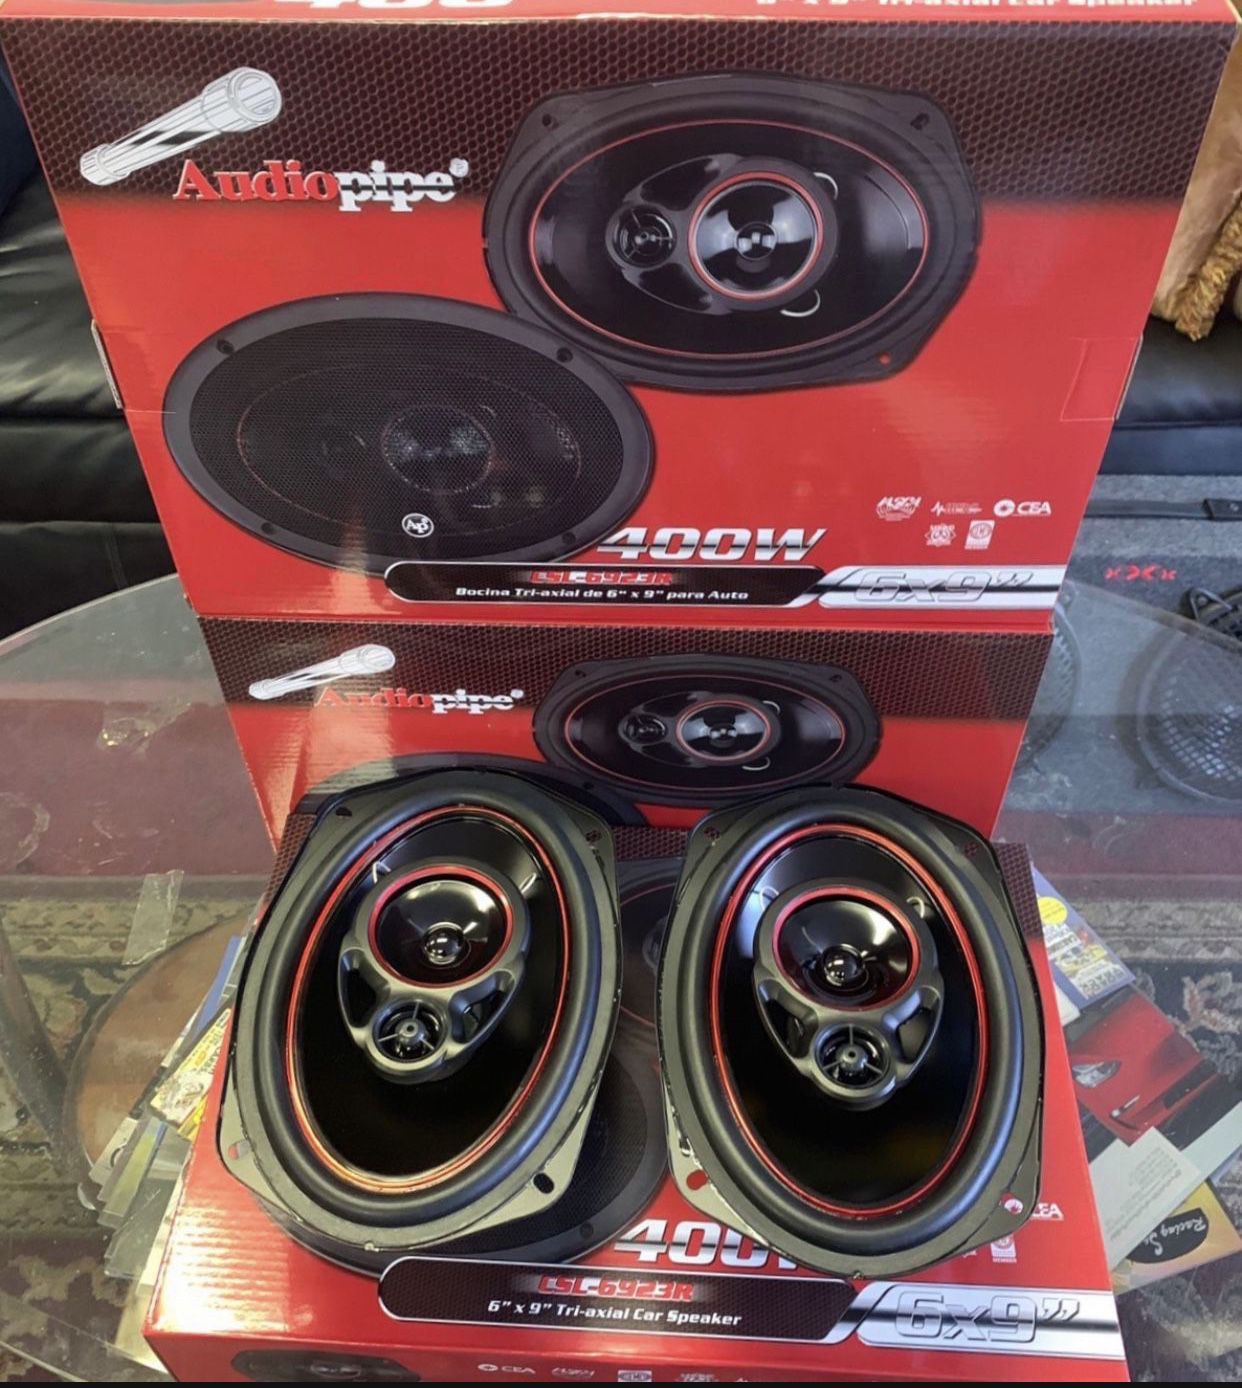 Audiopipe Car Audio 6x9 Car Stereo Speakers . 400 watts . New Years Super Sale . $40 A Pair While They Last . New